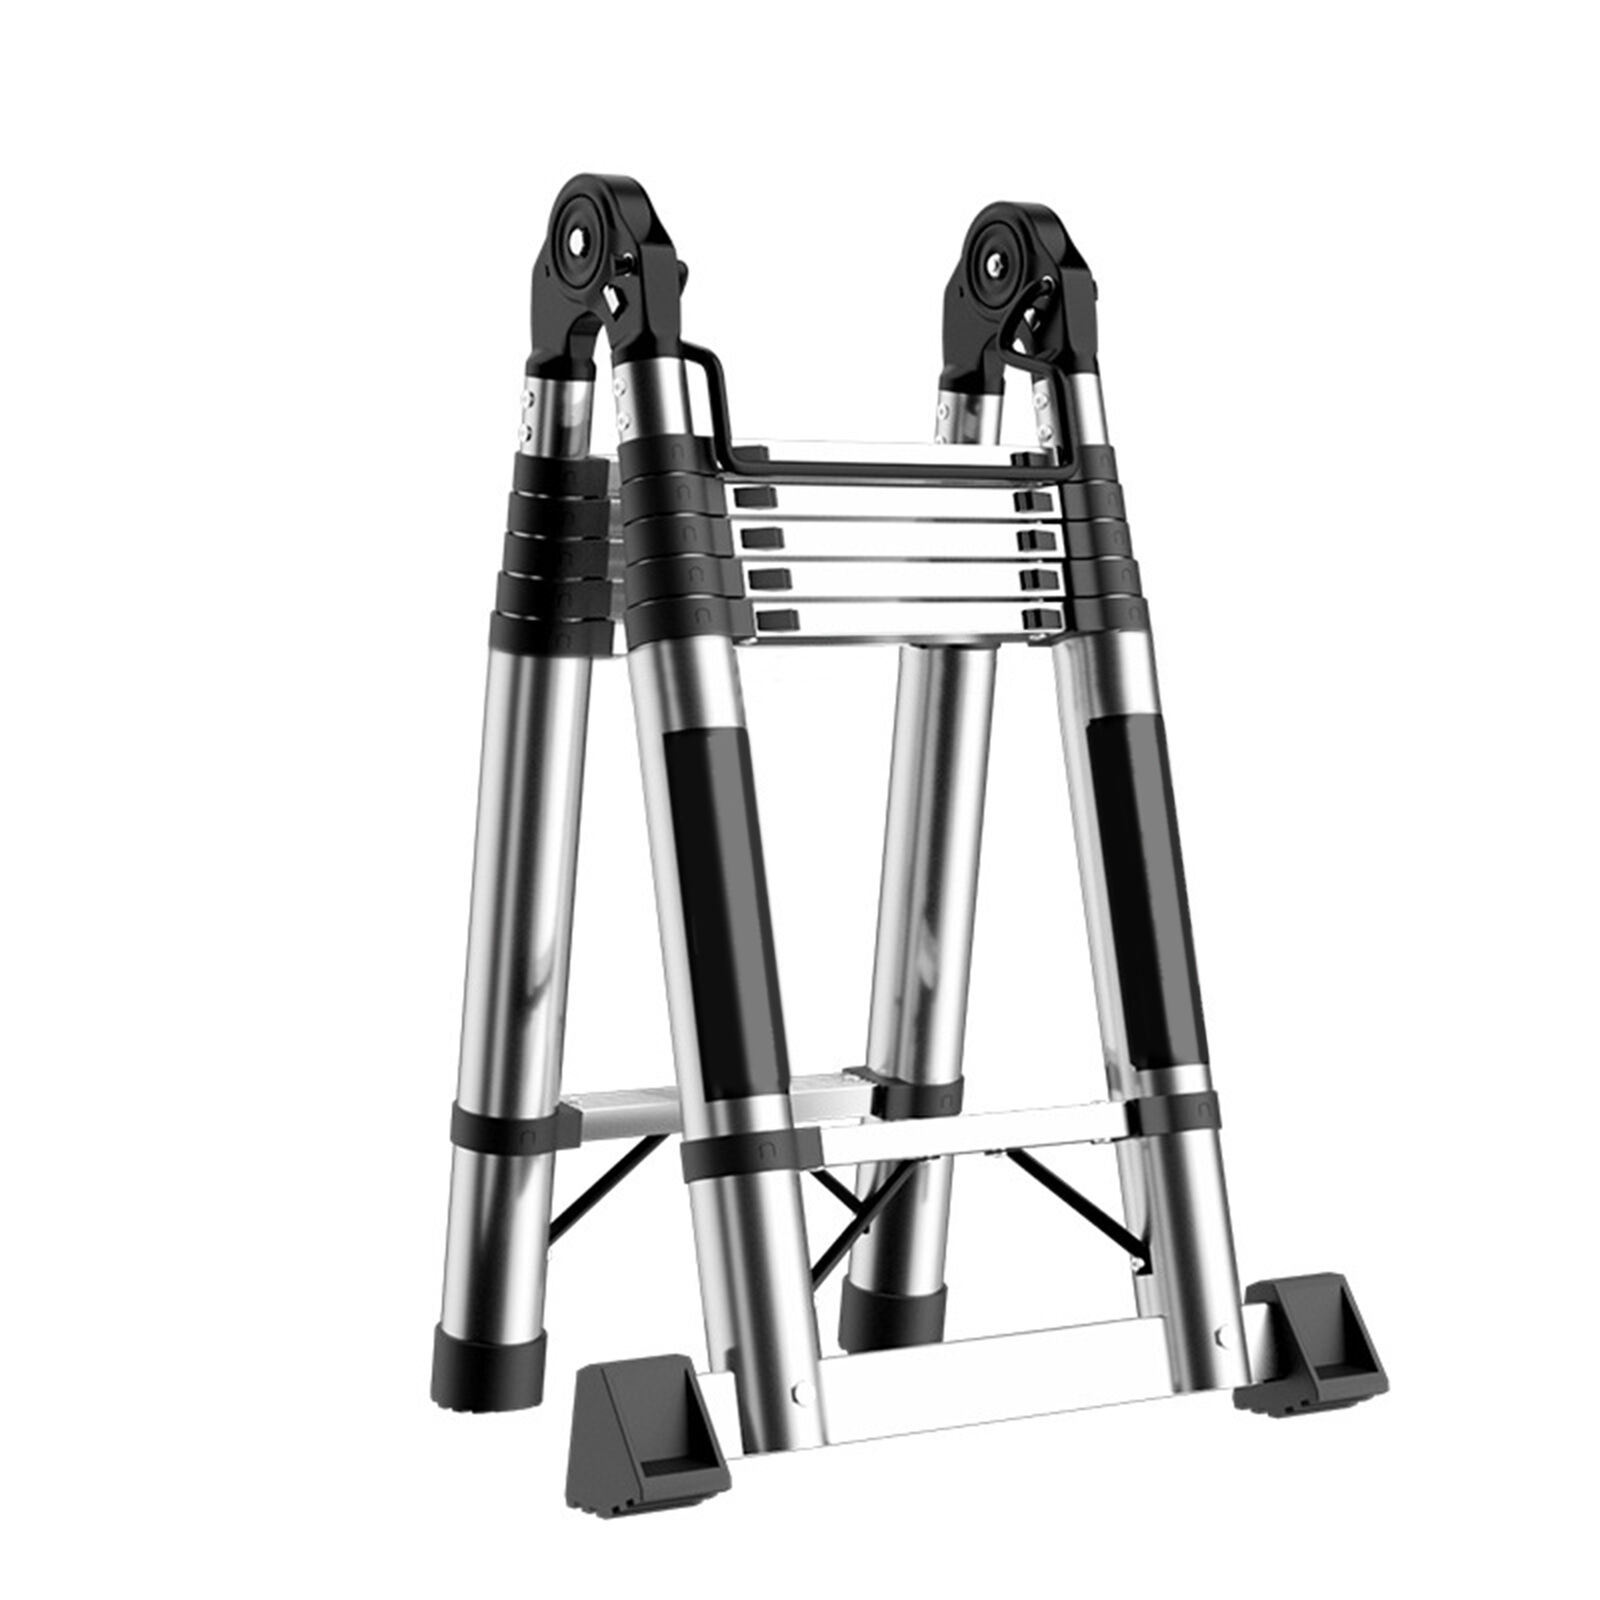 Stainless Steel Telescoping Ladder Extension Ladders Retraction Collapsible 